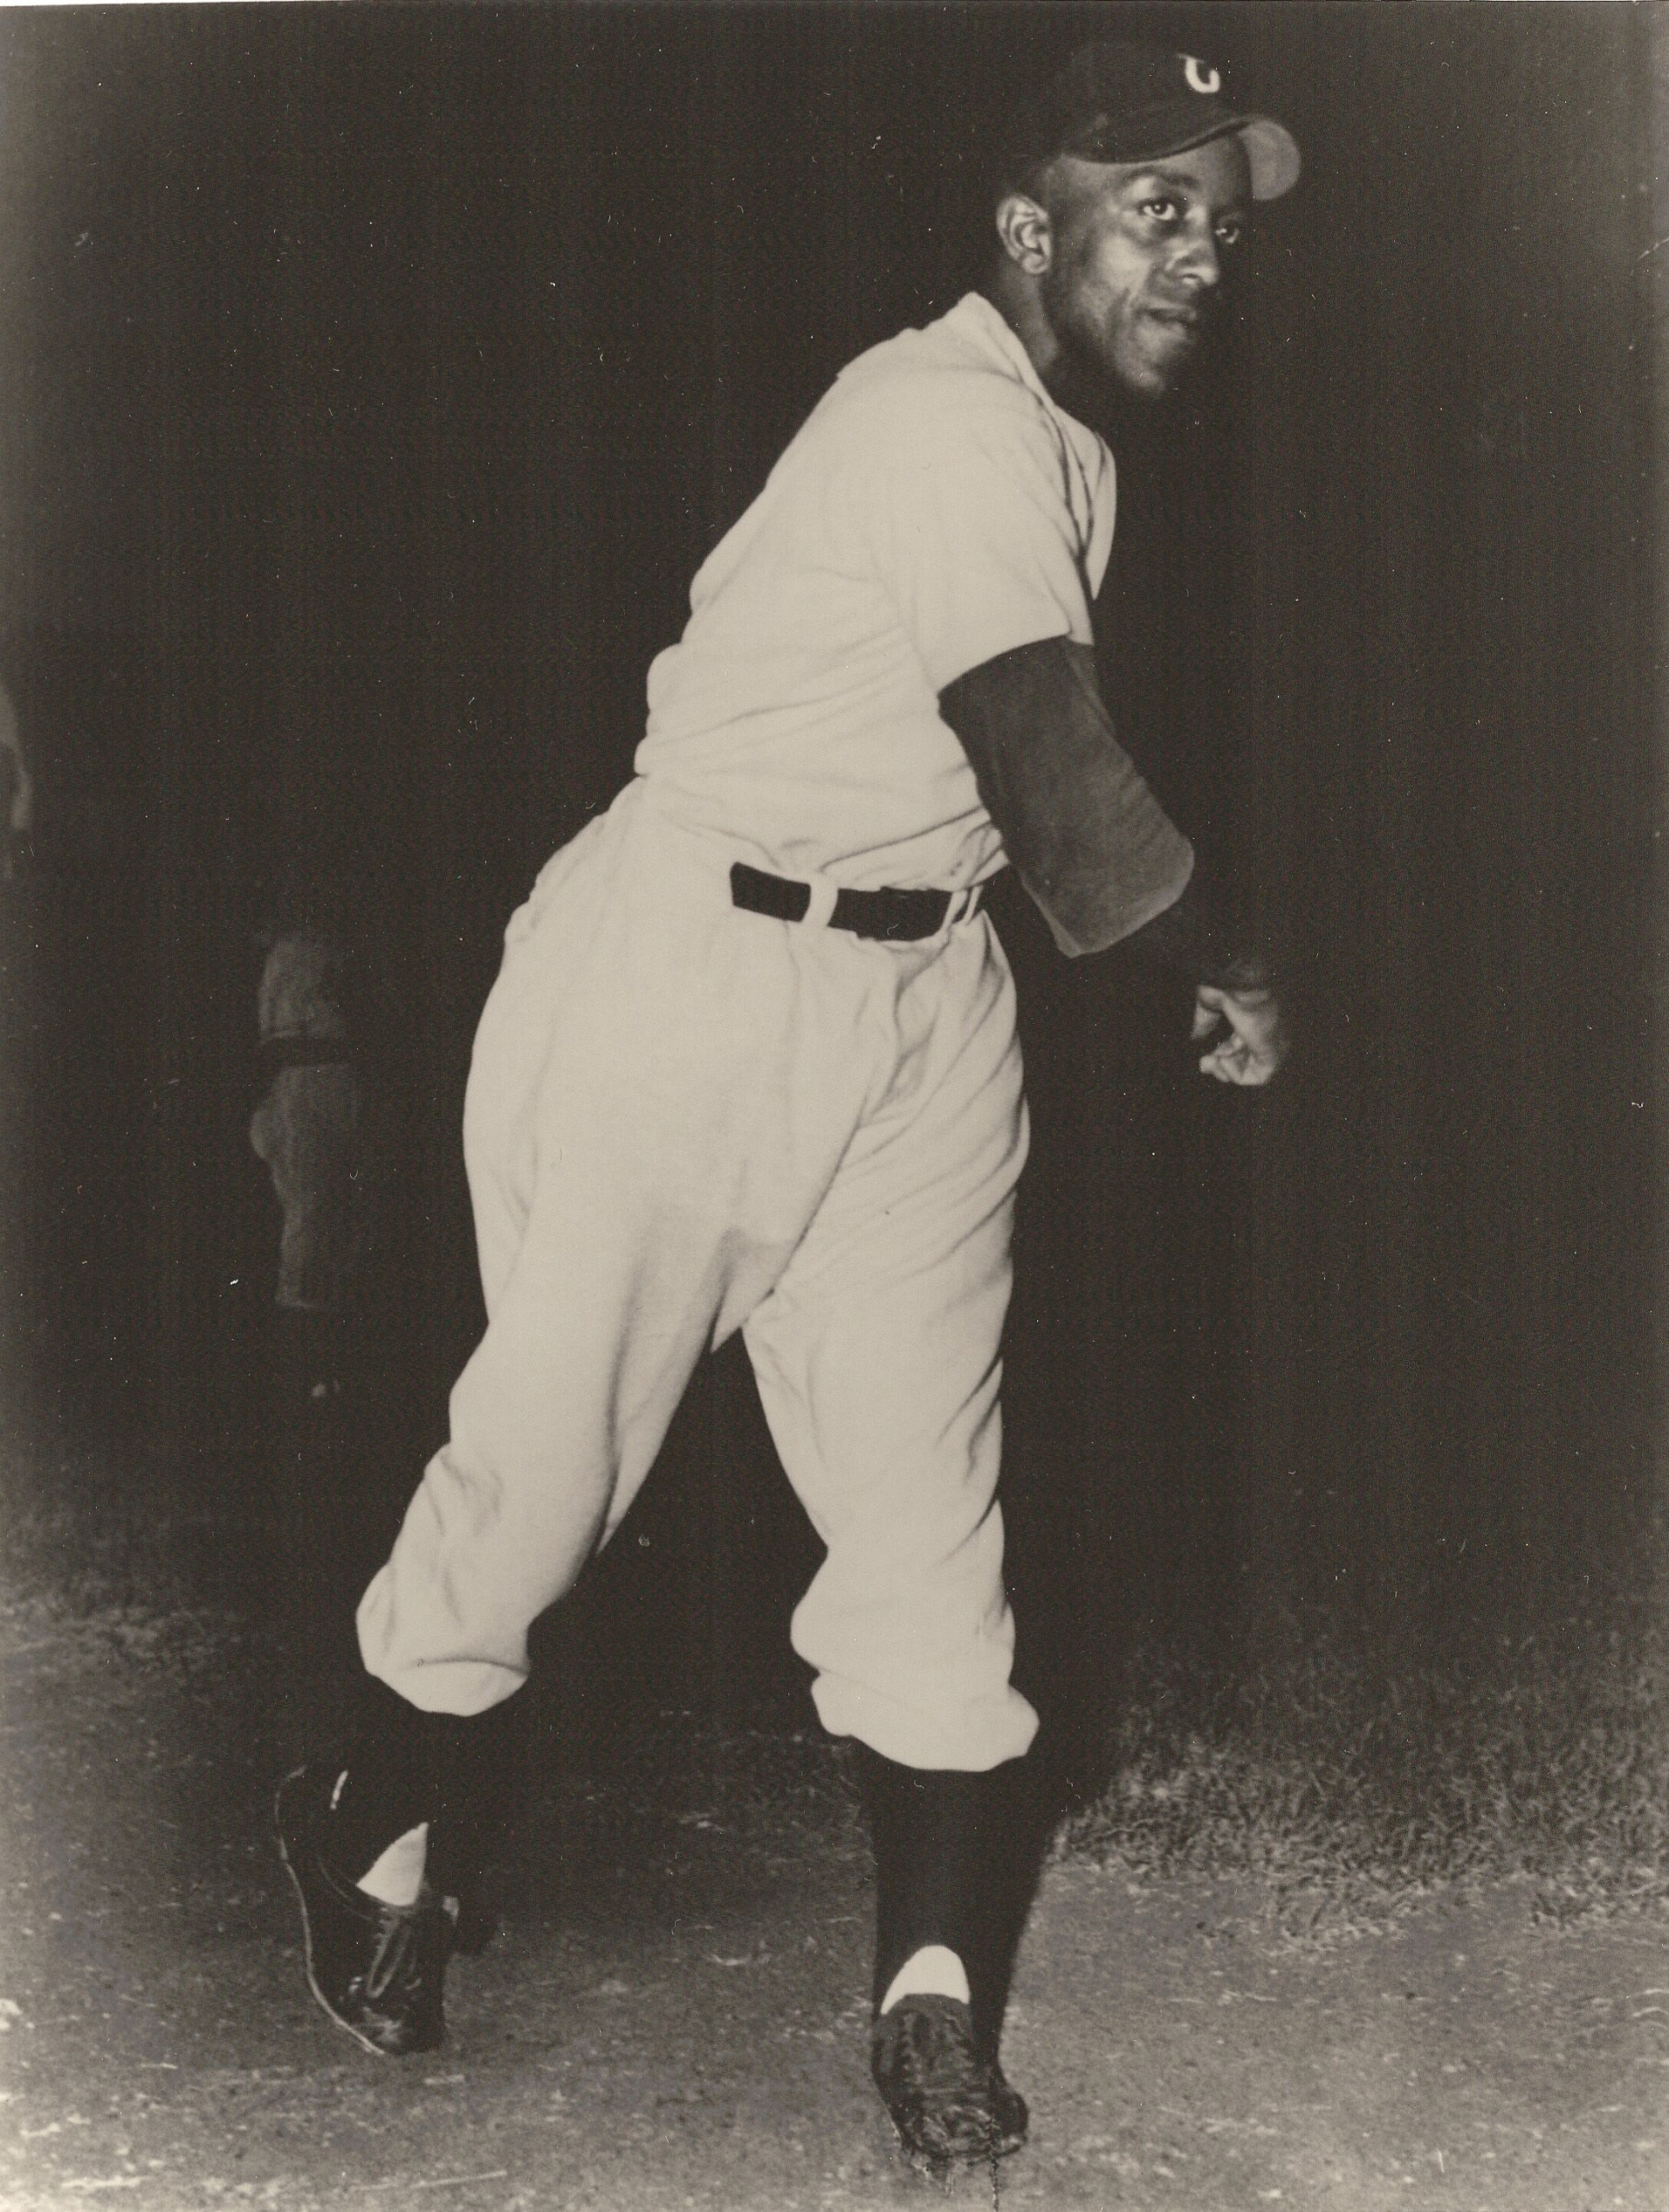 October 2, 1946: Jackie Robinson leads Montreal to thrilling 10